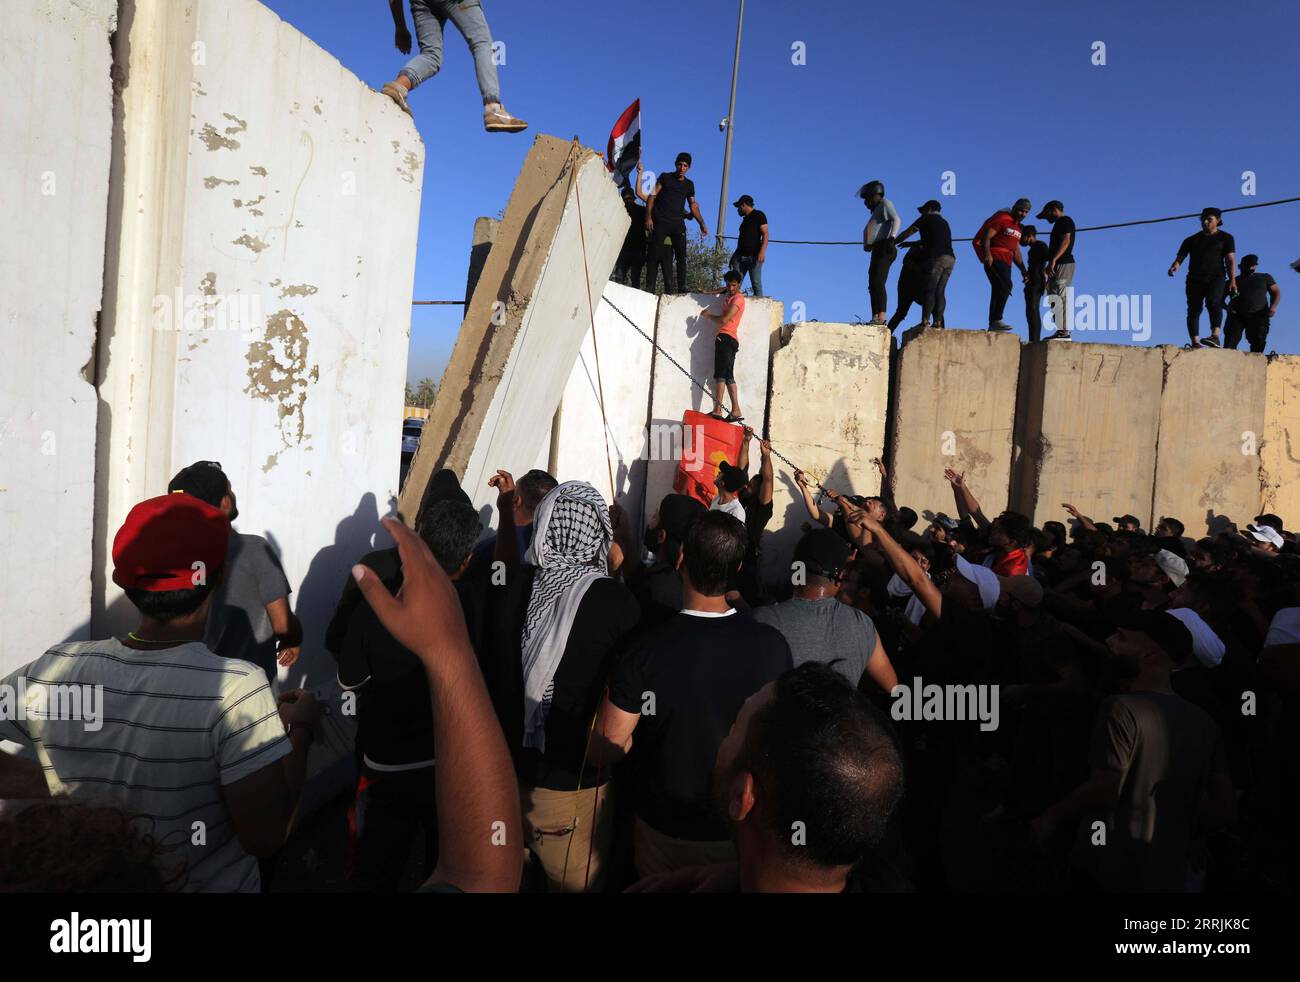 Bilder des Jahres 2022, News 07 Juli News Themen der Woche KW 30 News Bilder des Tages 220728 -- BAGHDAD, July 28, 2022 -- Followers of Shiite cleric Moqtada al-Sadr try to break into the heavily fortified Green Zone in Baghdad, Iraq, July 27, 2022. Hundreds of followers of Shiite cleric Moqtada al-Sadr on Wednesday broke into the Iraqi parliament building in central Baghdad to protest against the nomination of Mohammed Shia al-Sudani for the post of prime minister. The protest came two days after the Coordination Framework, an umbrella group of Shiite parliamentary parties, nominated Mohammed Stock Photo